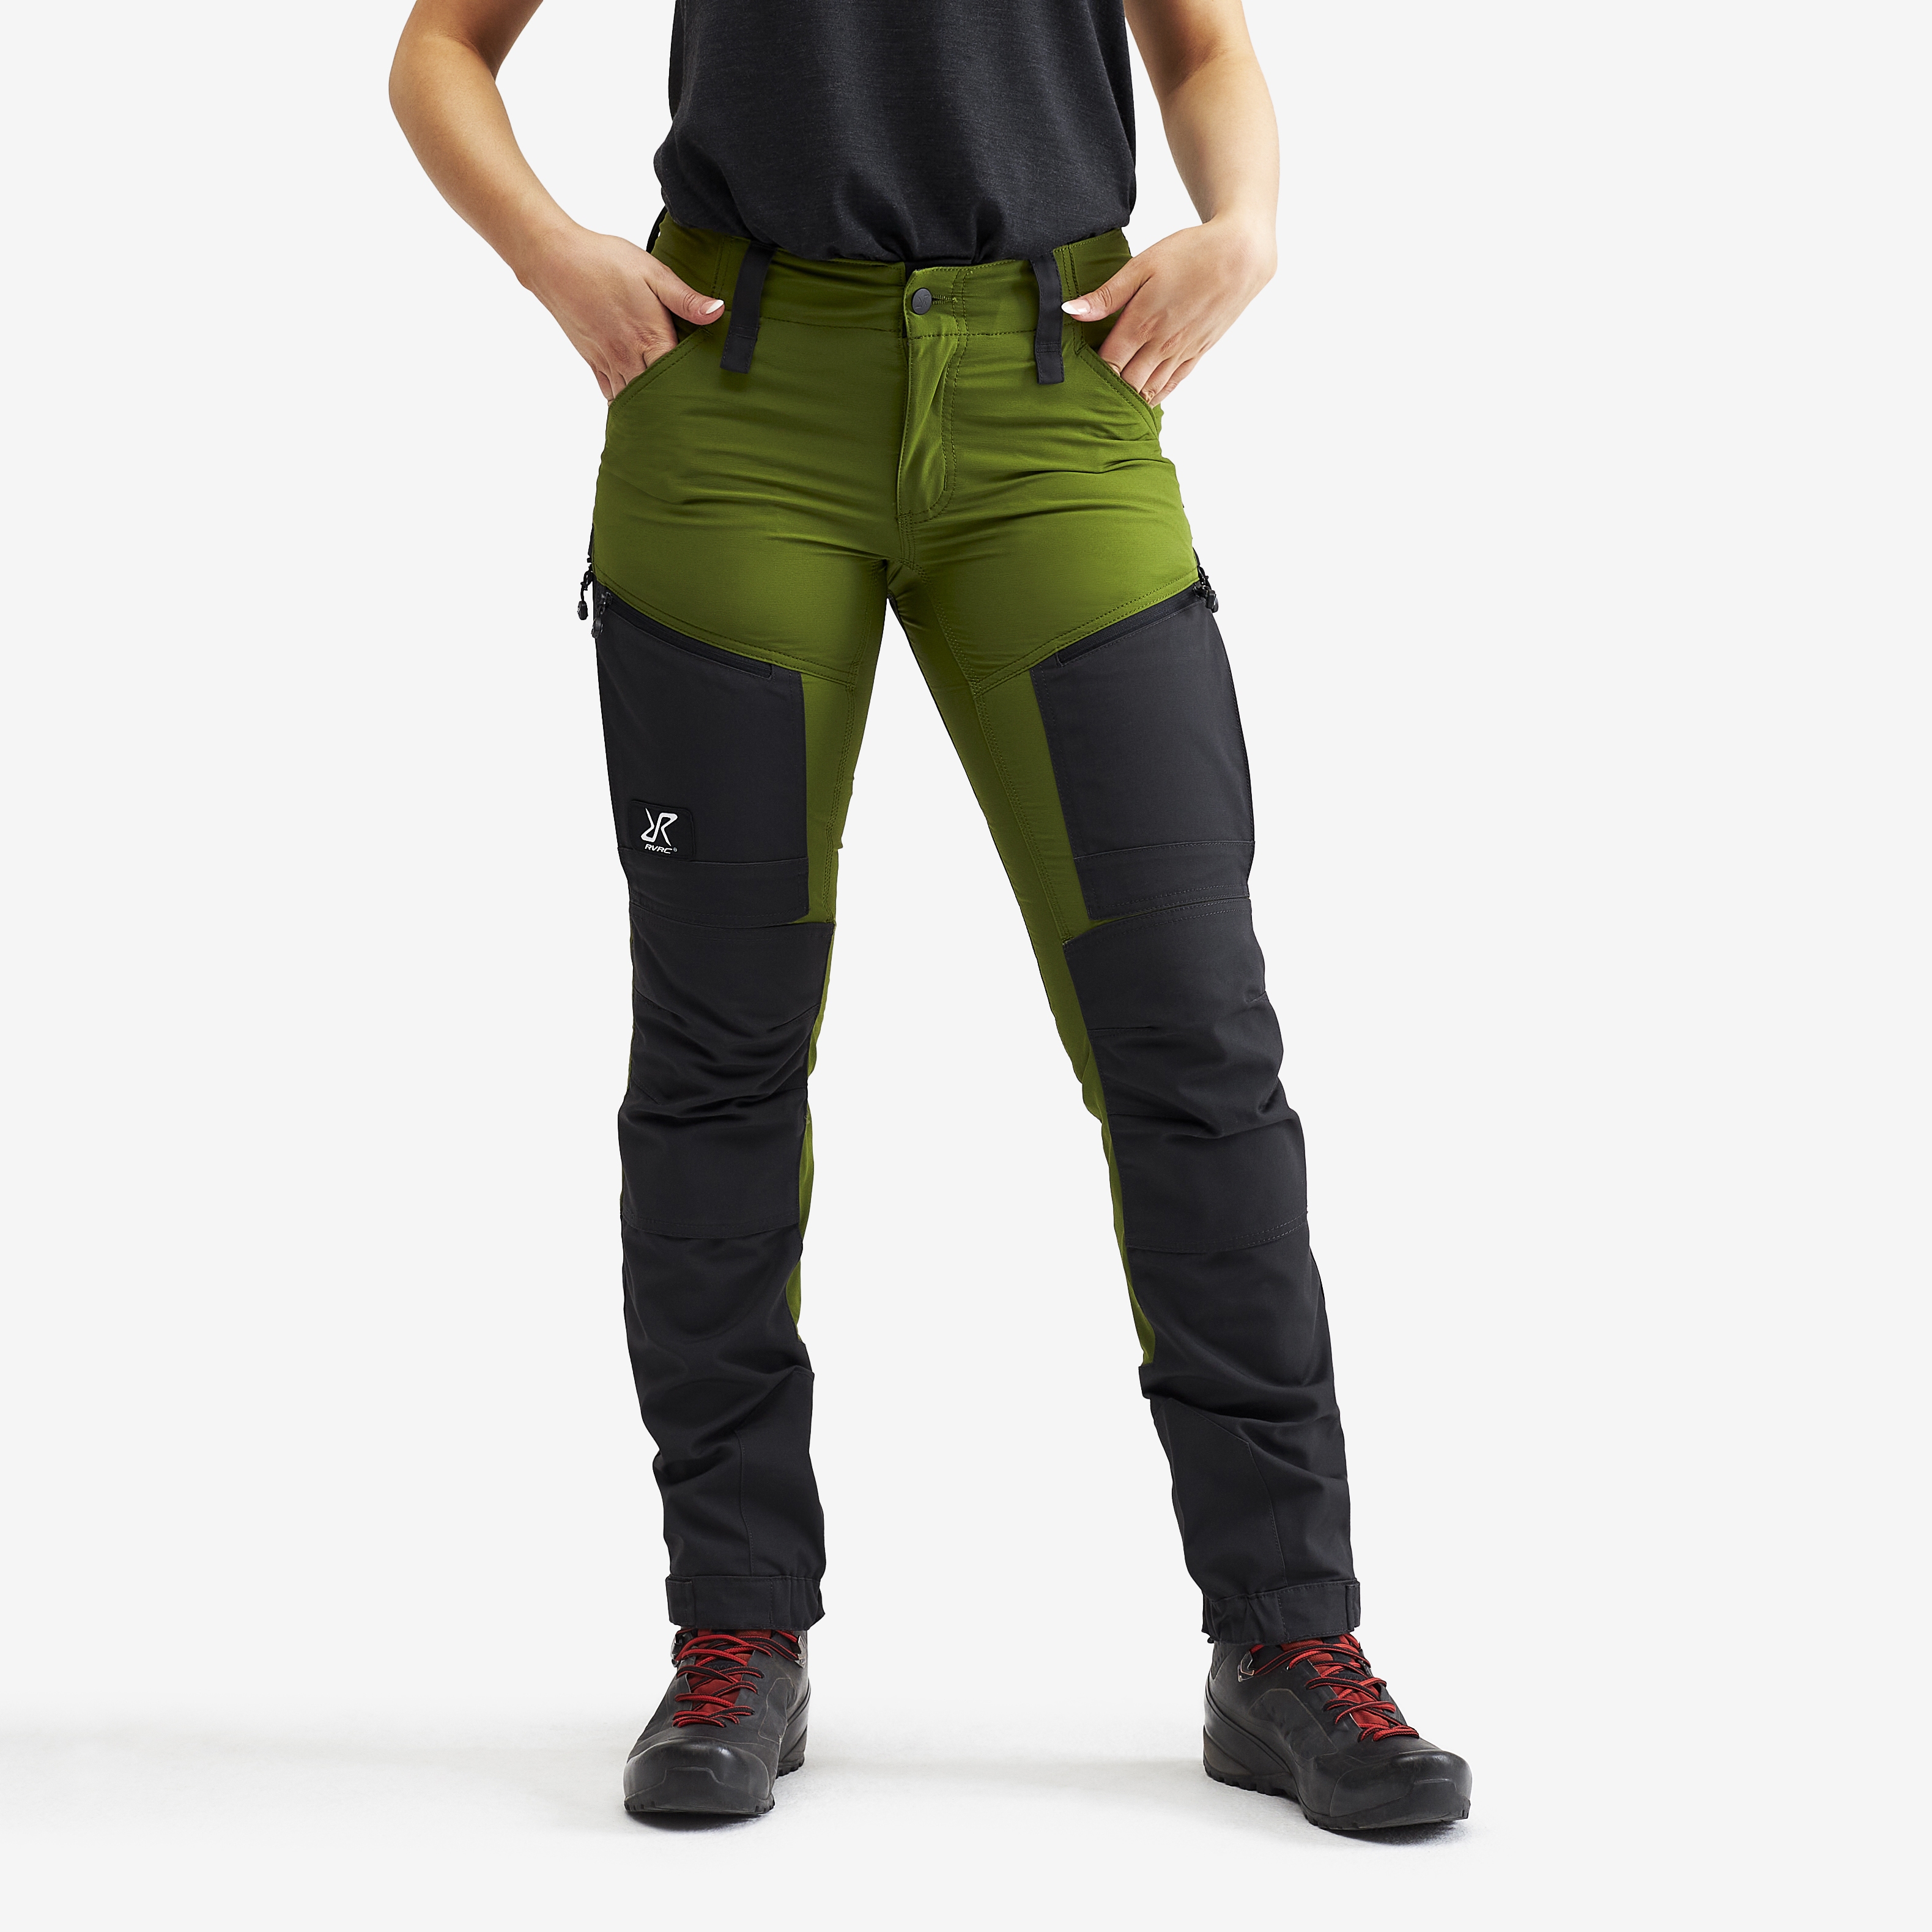 RVRC GP Pro hiking trousers for women in green